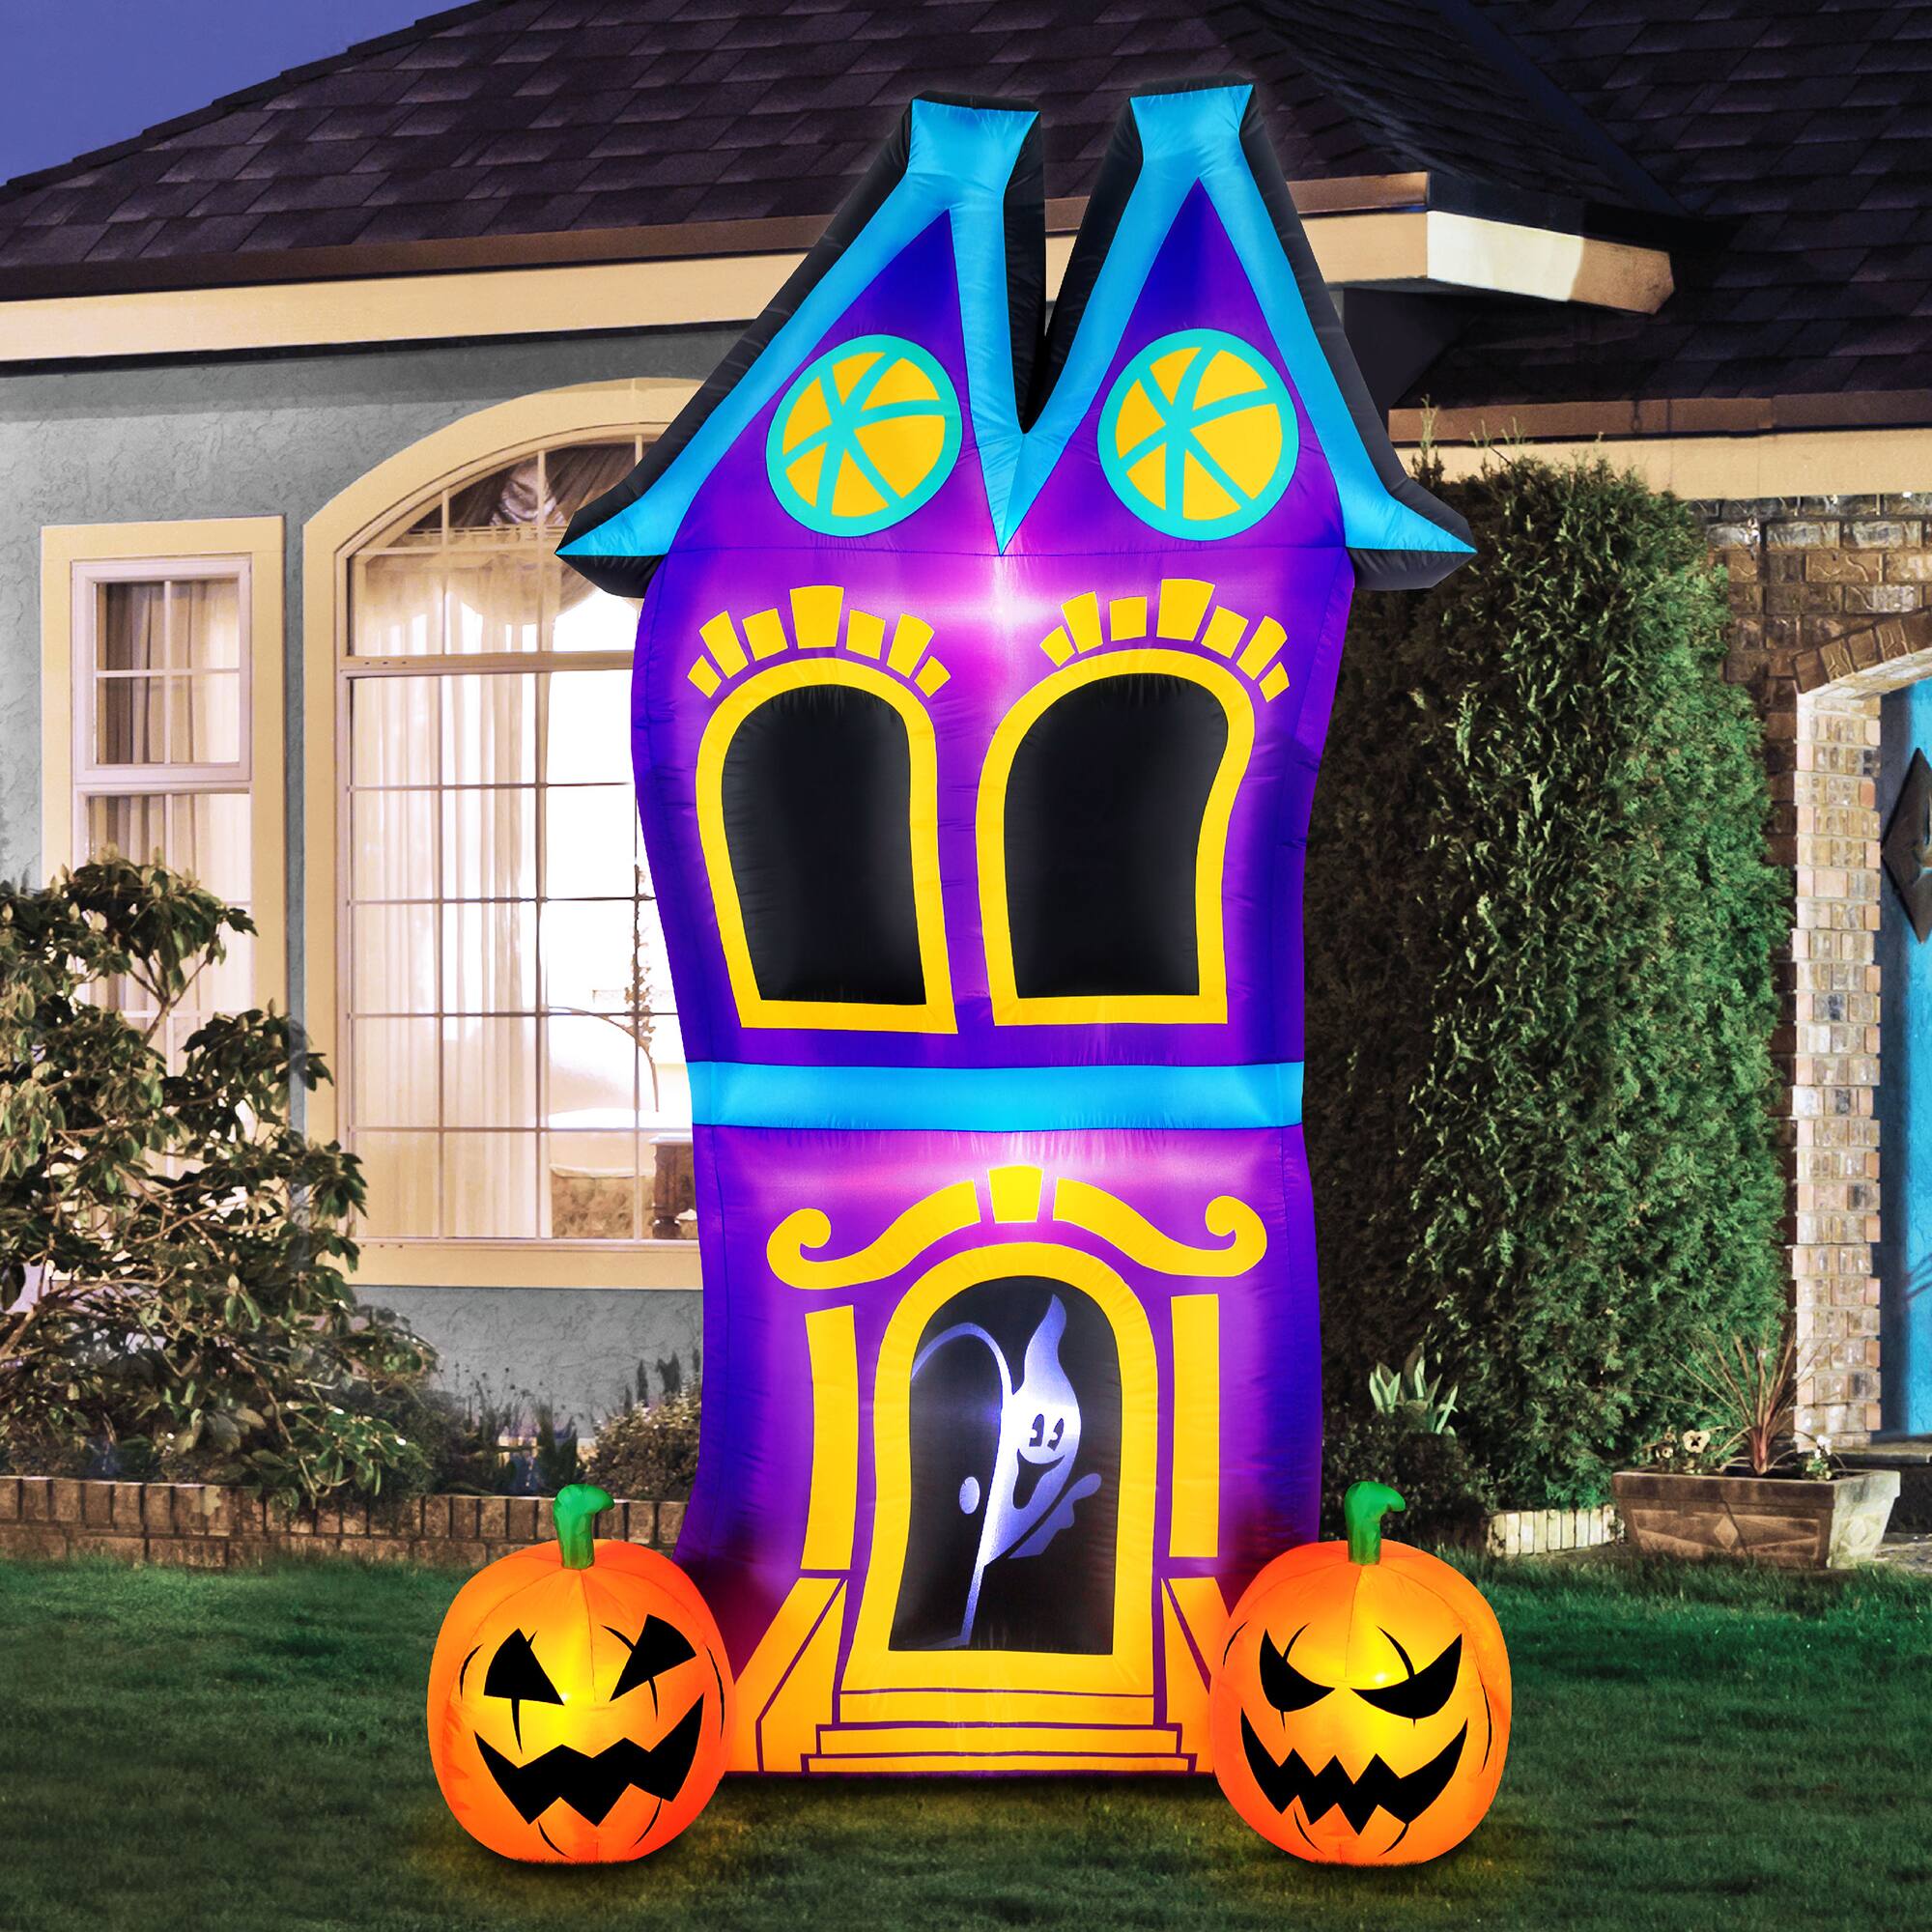 8ft. Airflowz Inflatable Halloween Haunted House with Projection Silhouette